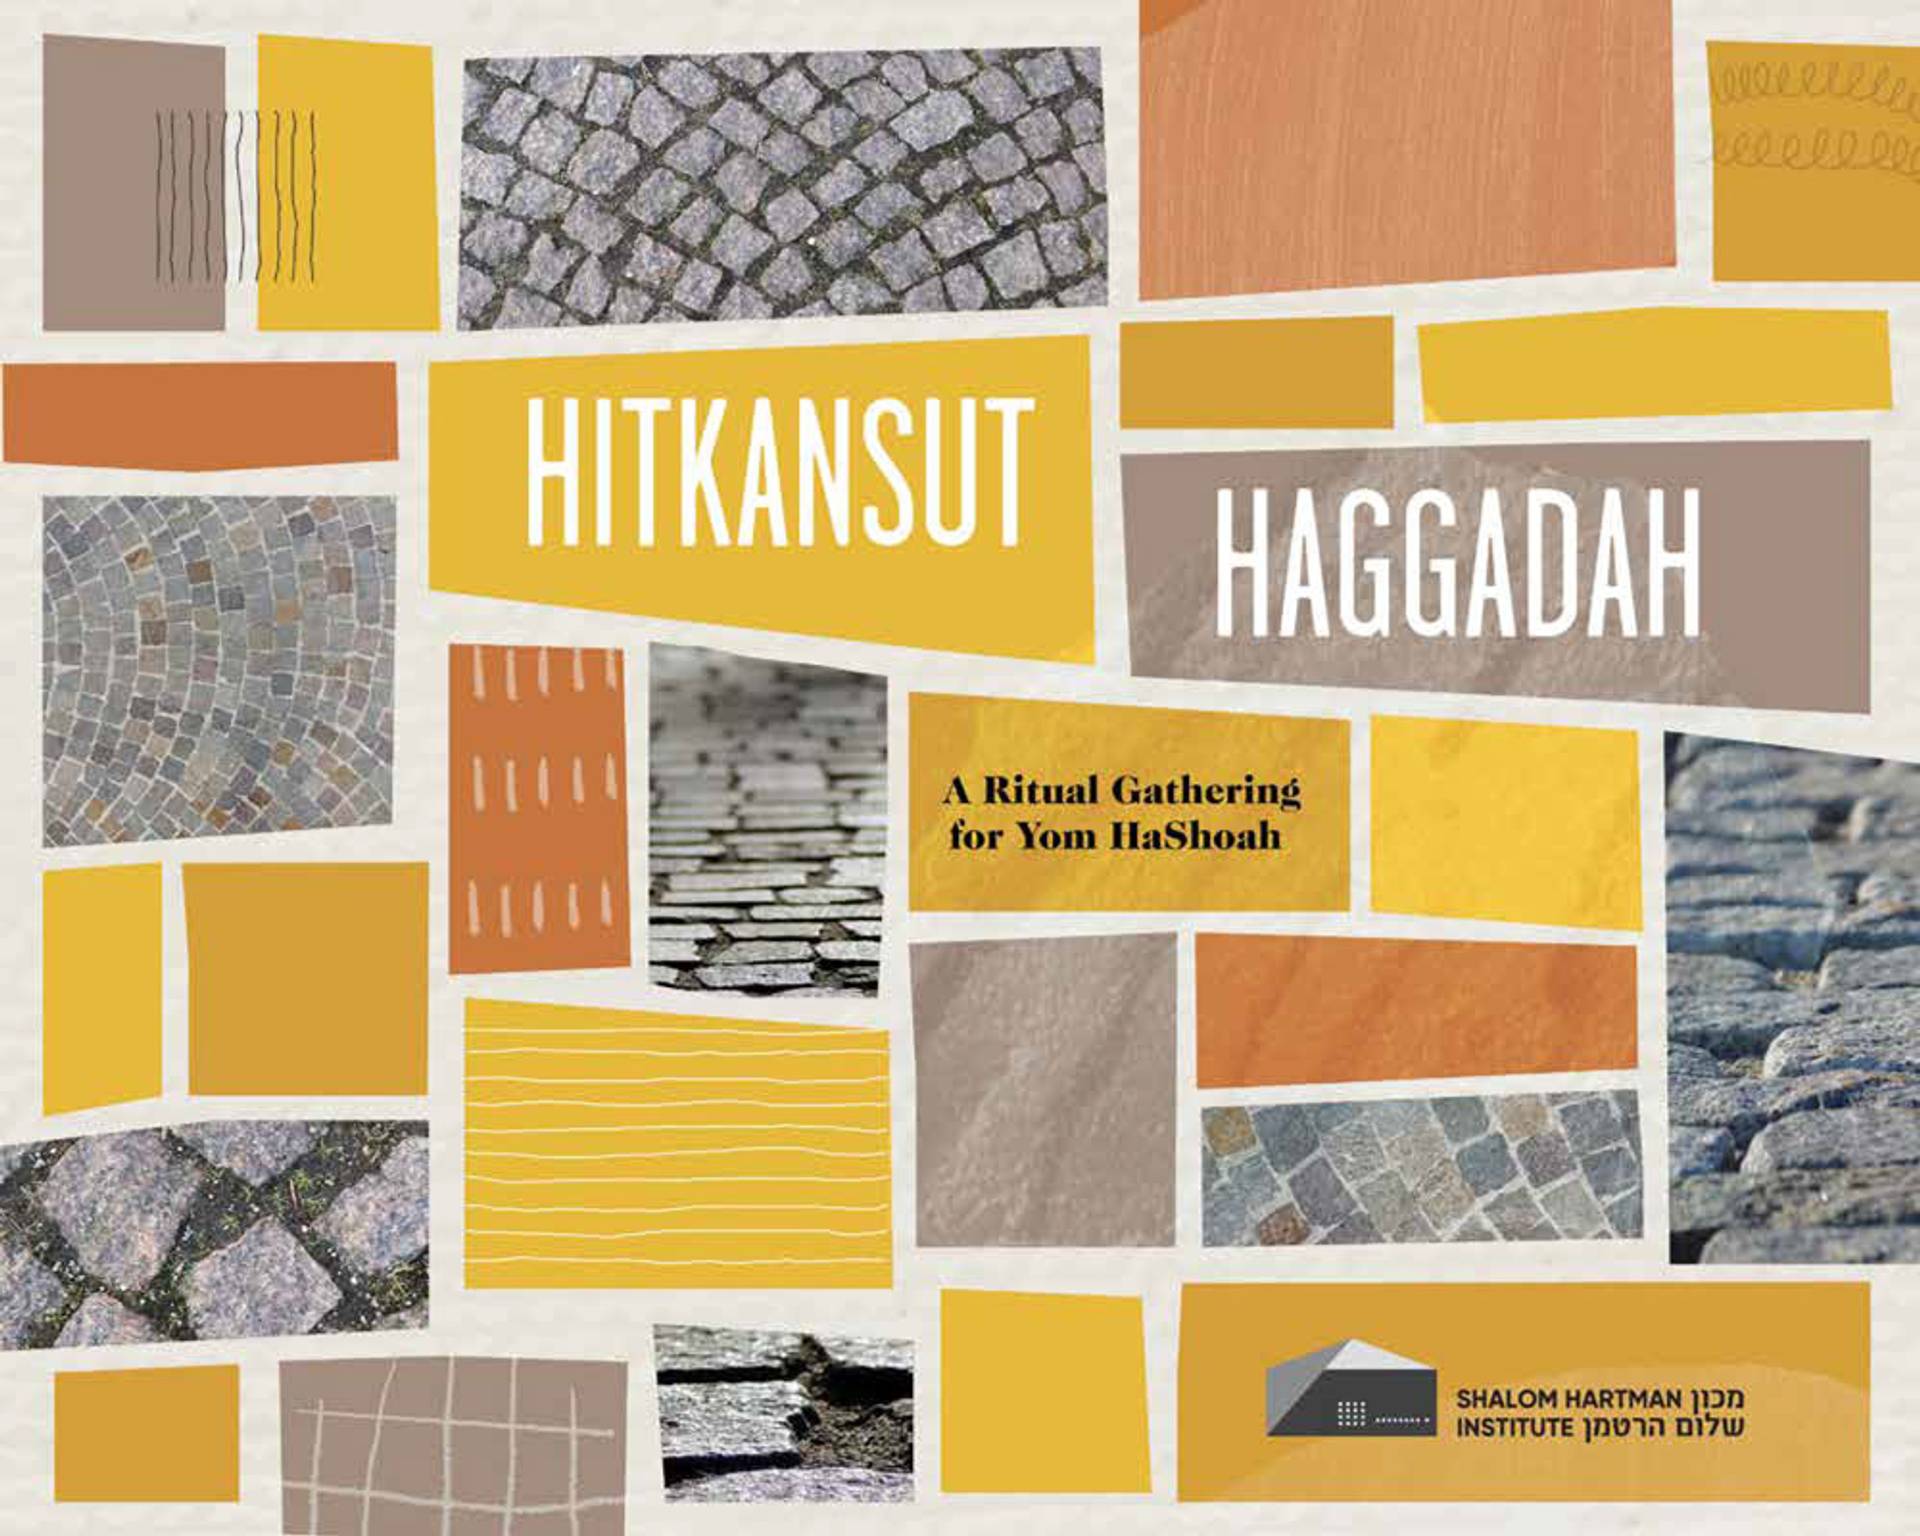 The Hitkansut takes the form of a Haggadah, with a consistent core text supplemented by many varied additional readings and explicit points for participation and discussion